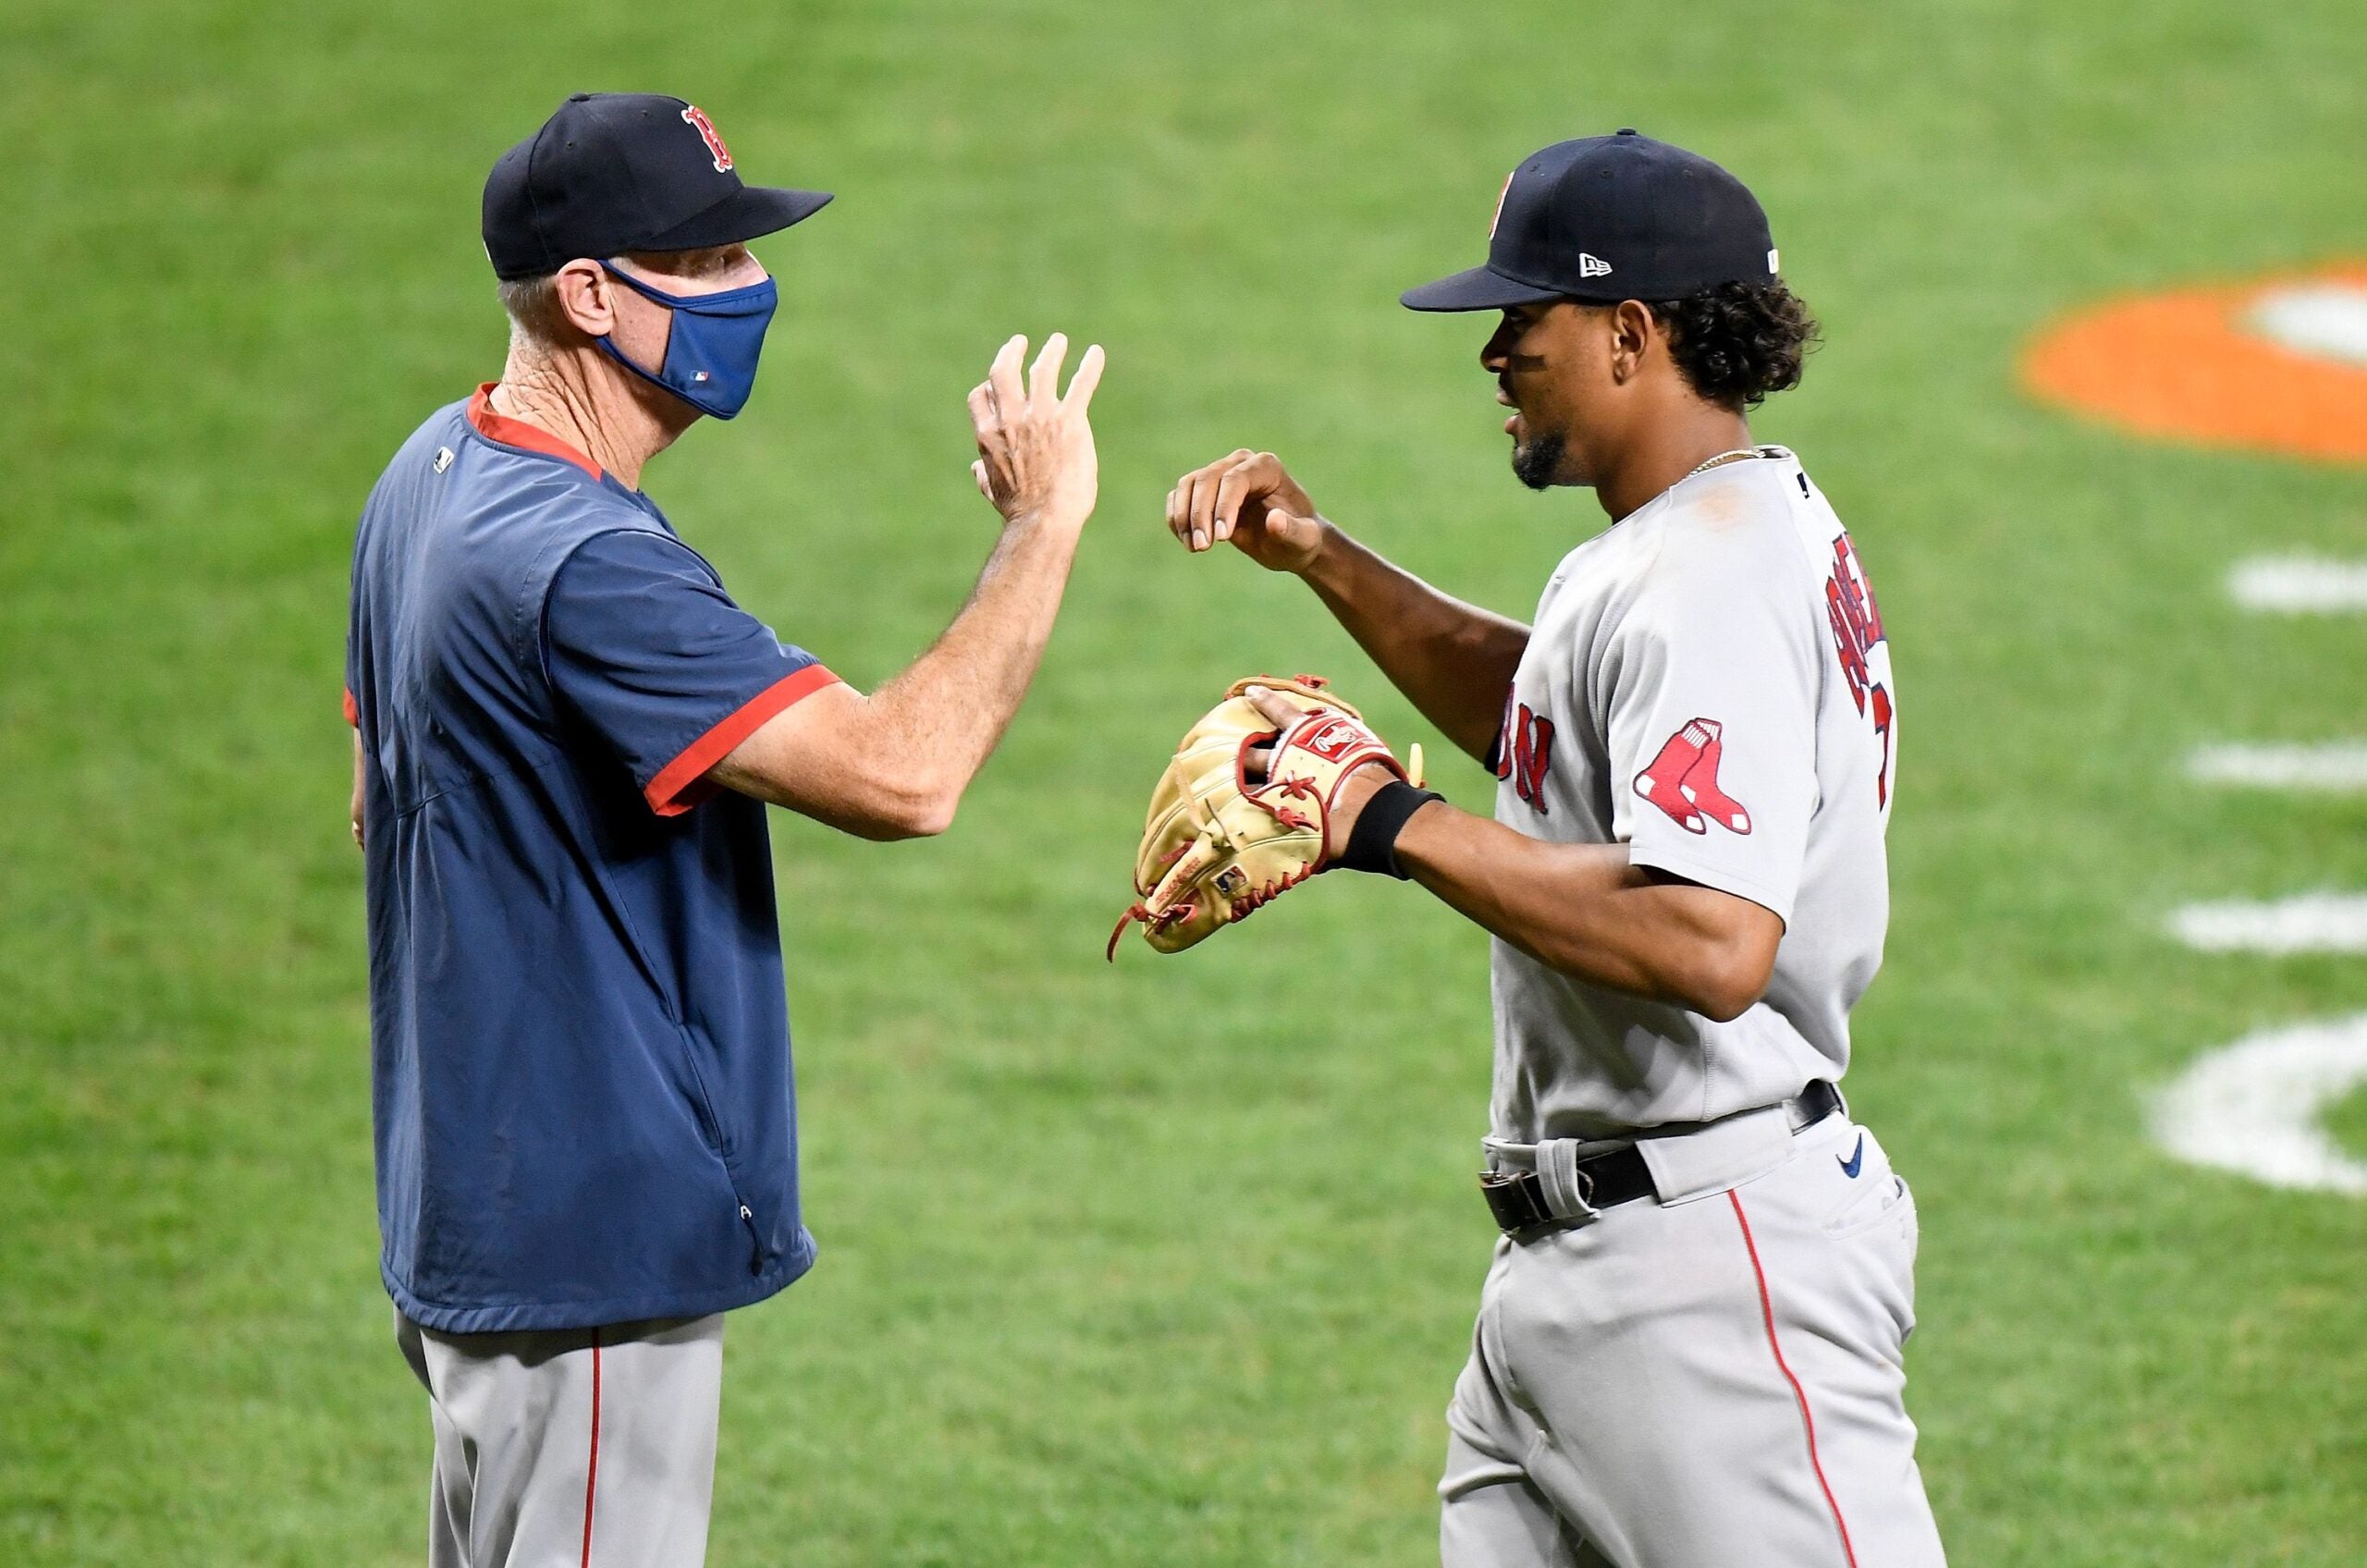 Houck, Vazquez grand slam lead Red Sox to 8-2 rout of Braves - The